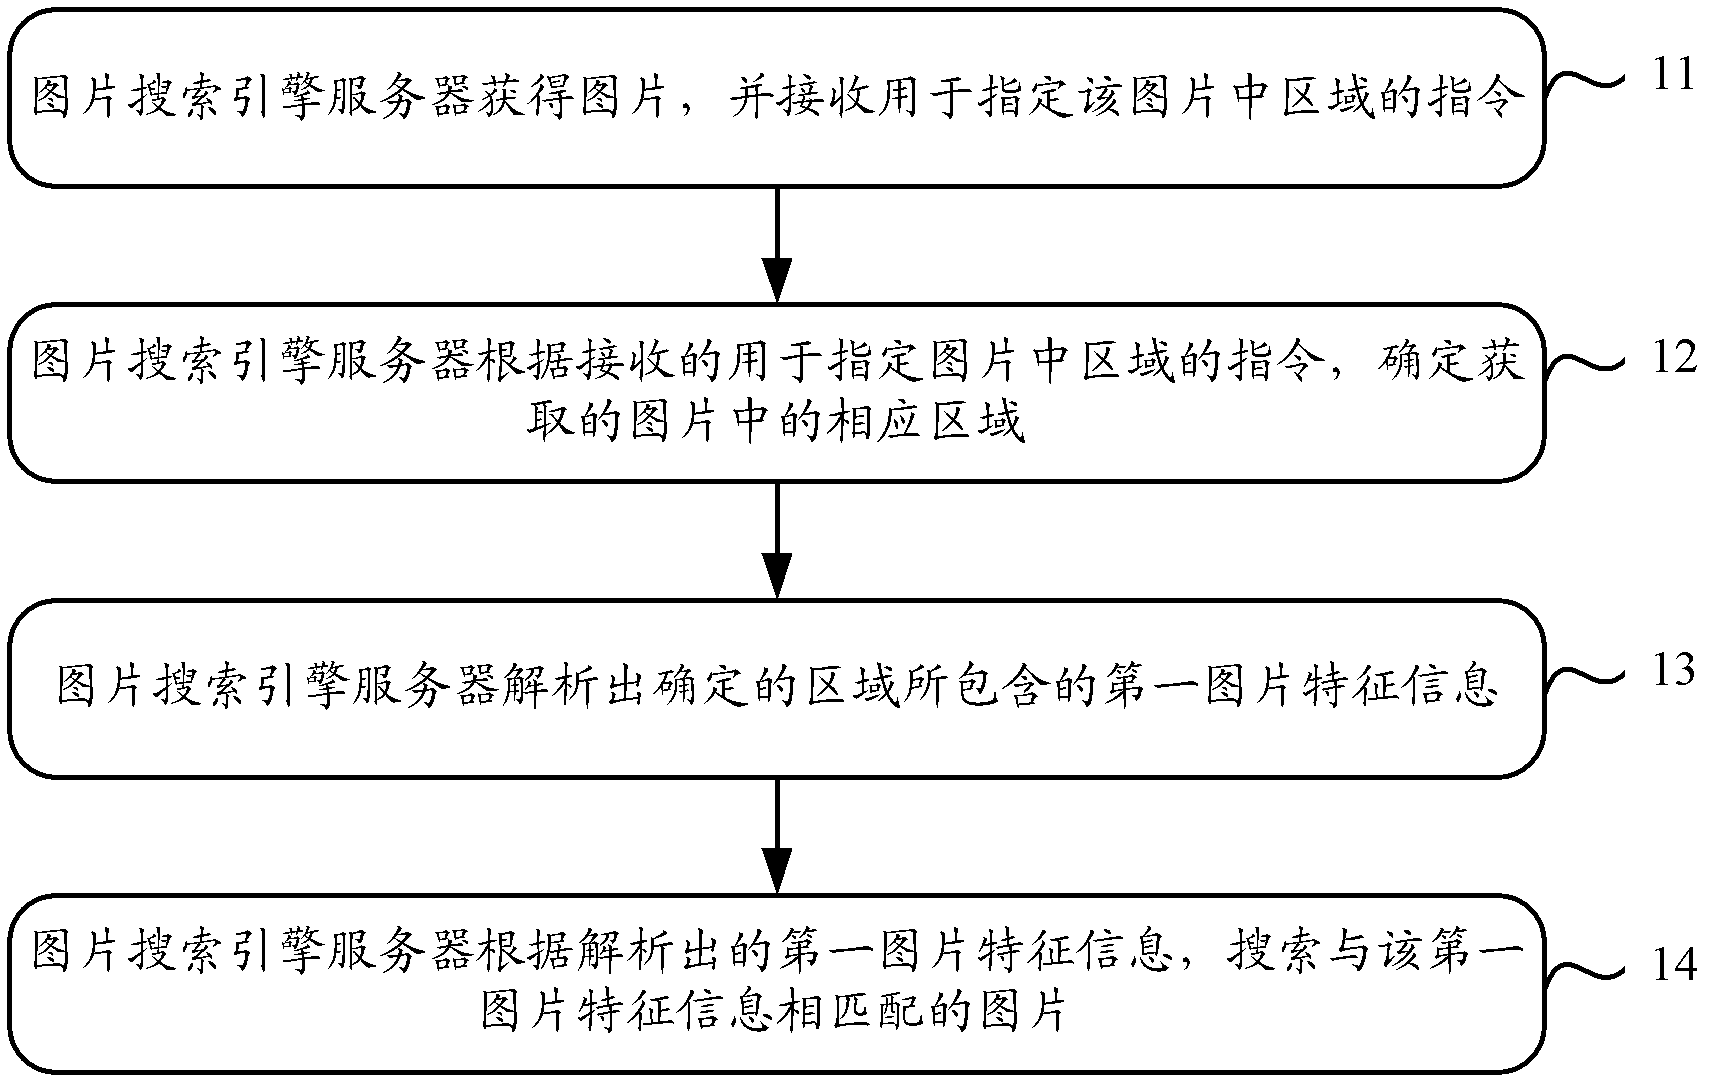 Image search method based on image feature information and image search engine server based on image feature information